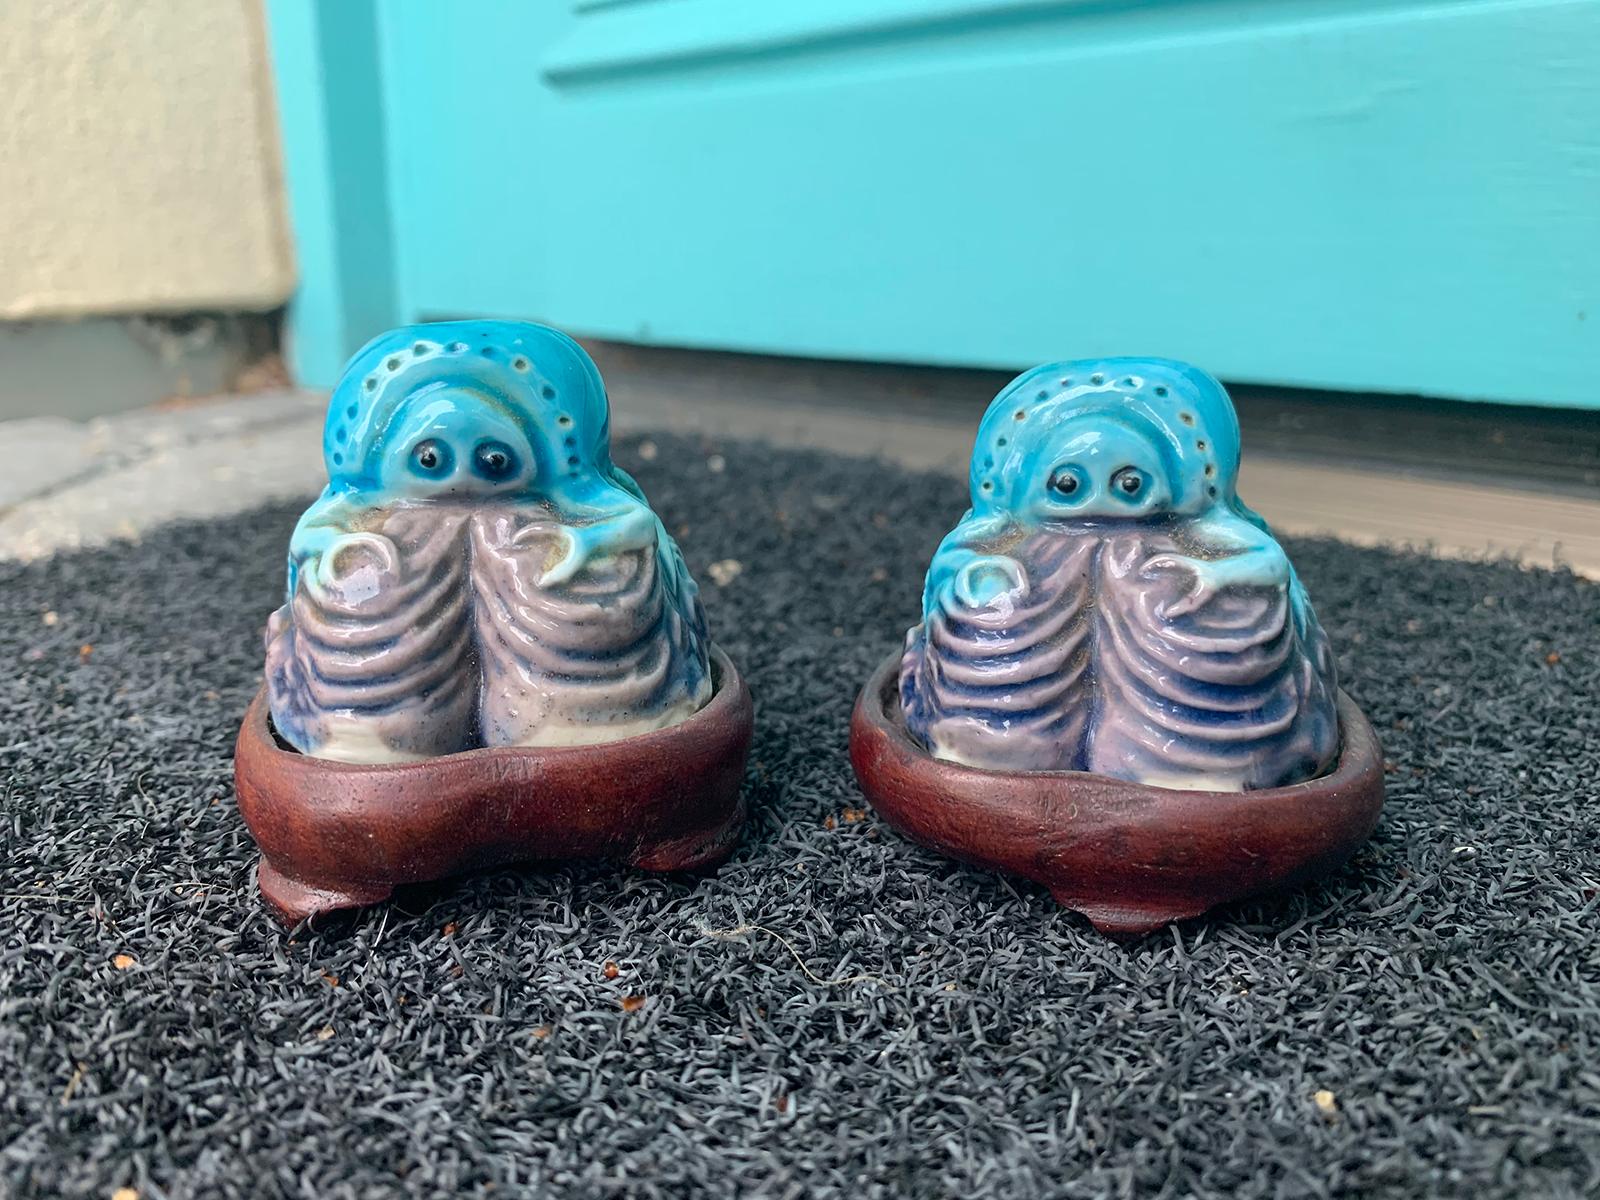 Pair of 19th-20th century Chinese turquoise blue and purple glazed porcelain crabs on wooden stands, marked China and has old 